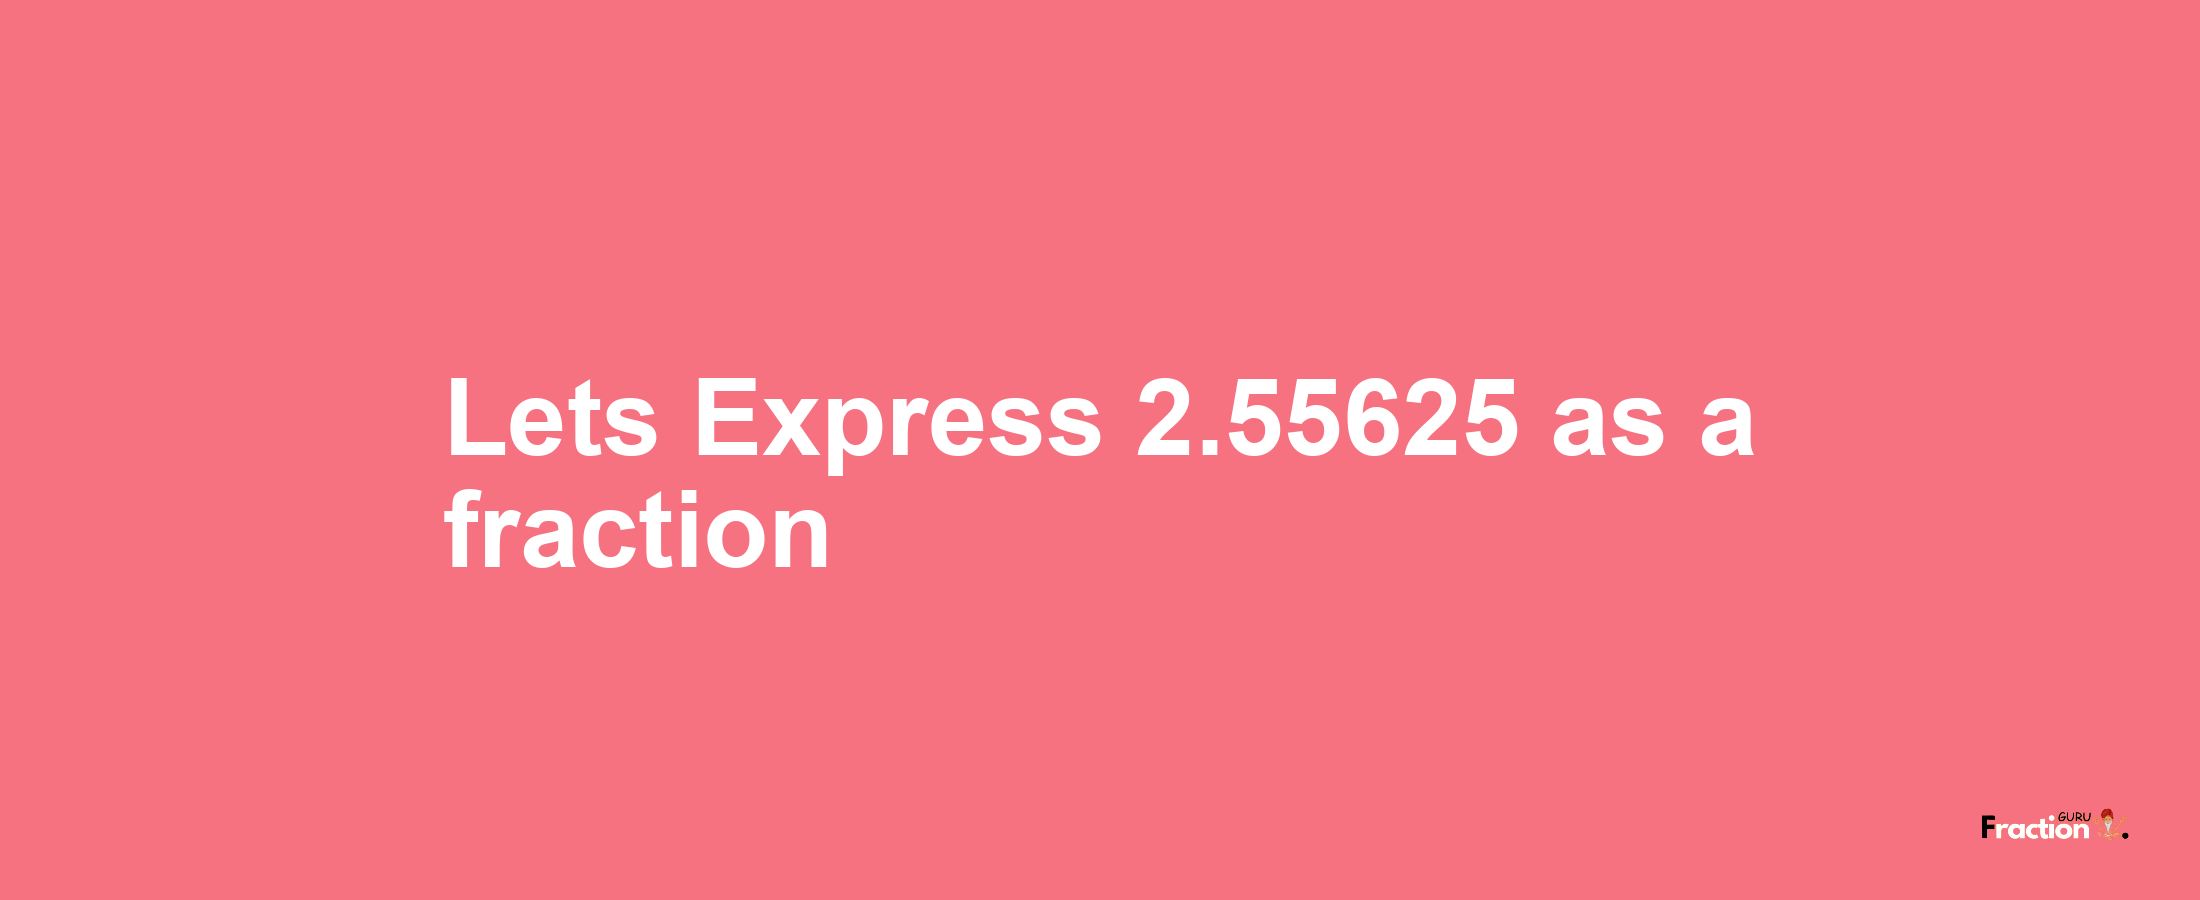 Lets Express 2.55625 as afraction